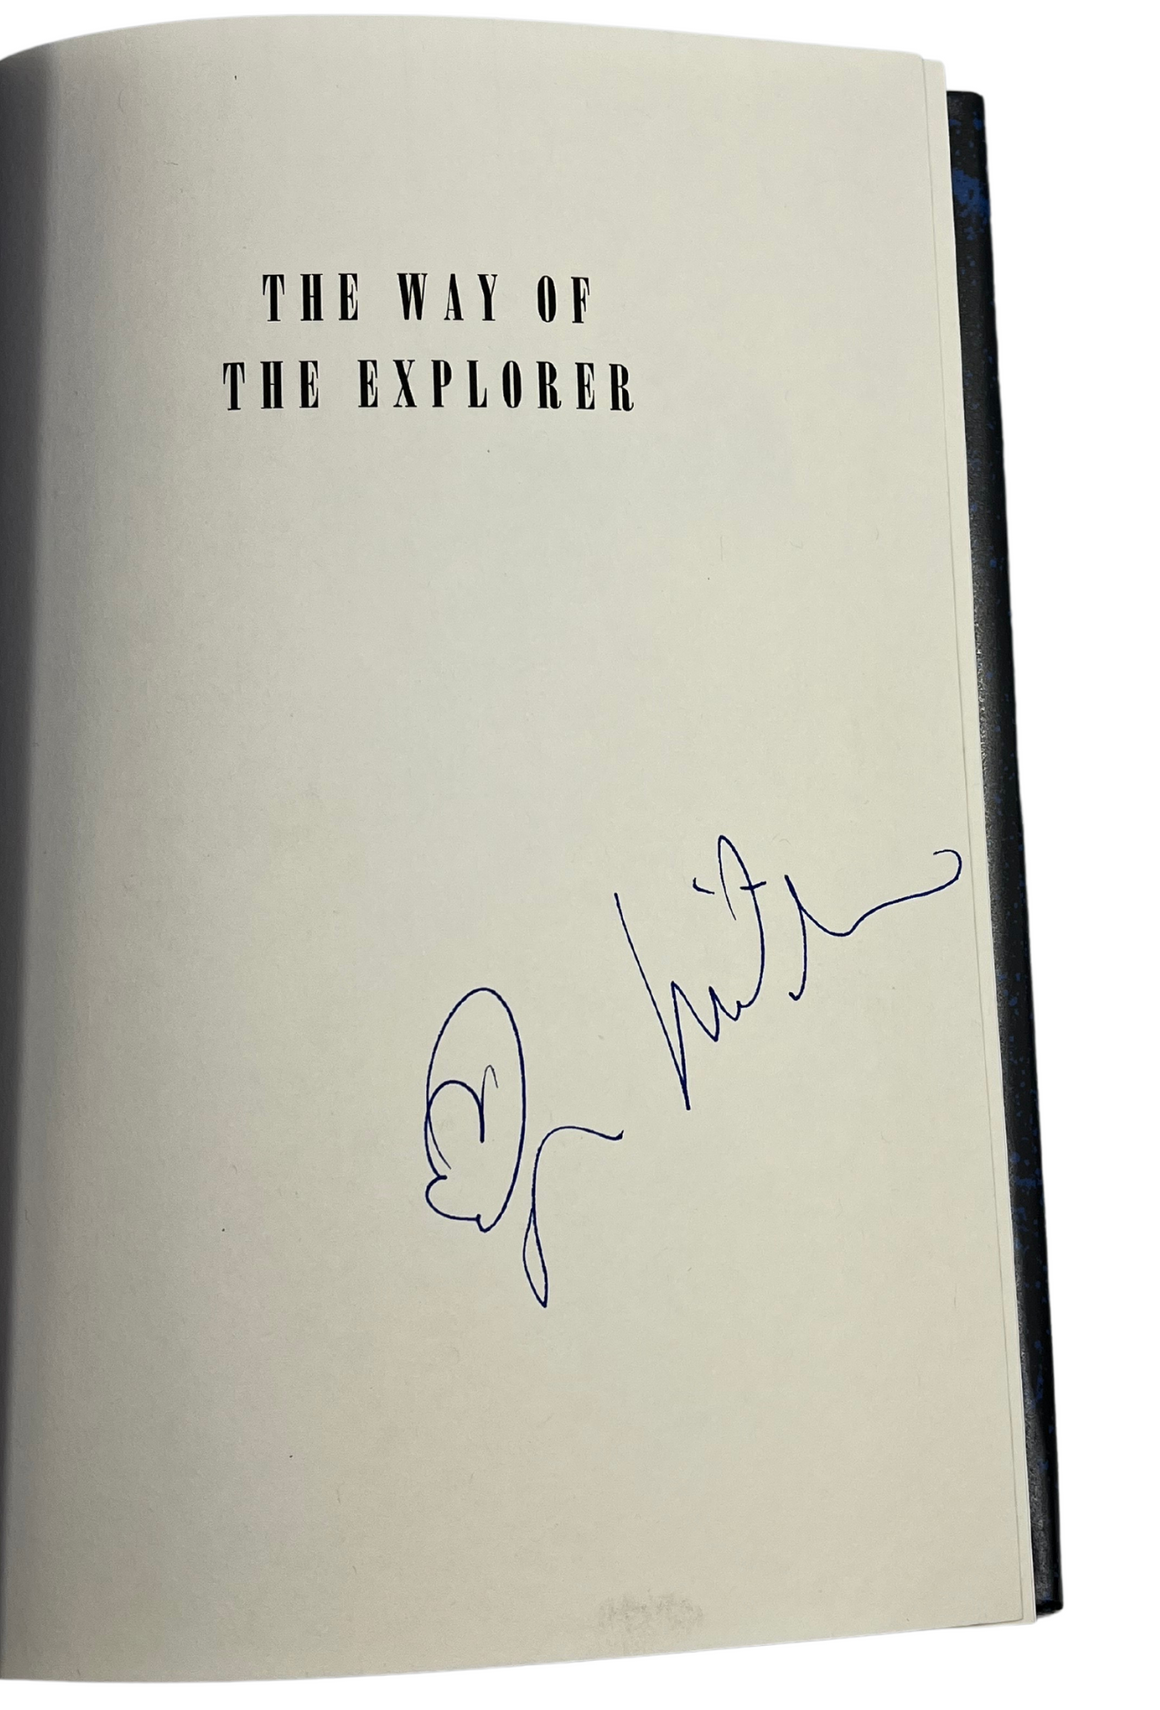 The Way of the Explorer, Signed by Dr. Edgar Mitchell, First Edition in Original Dust Jacket, 1996